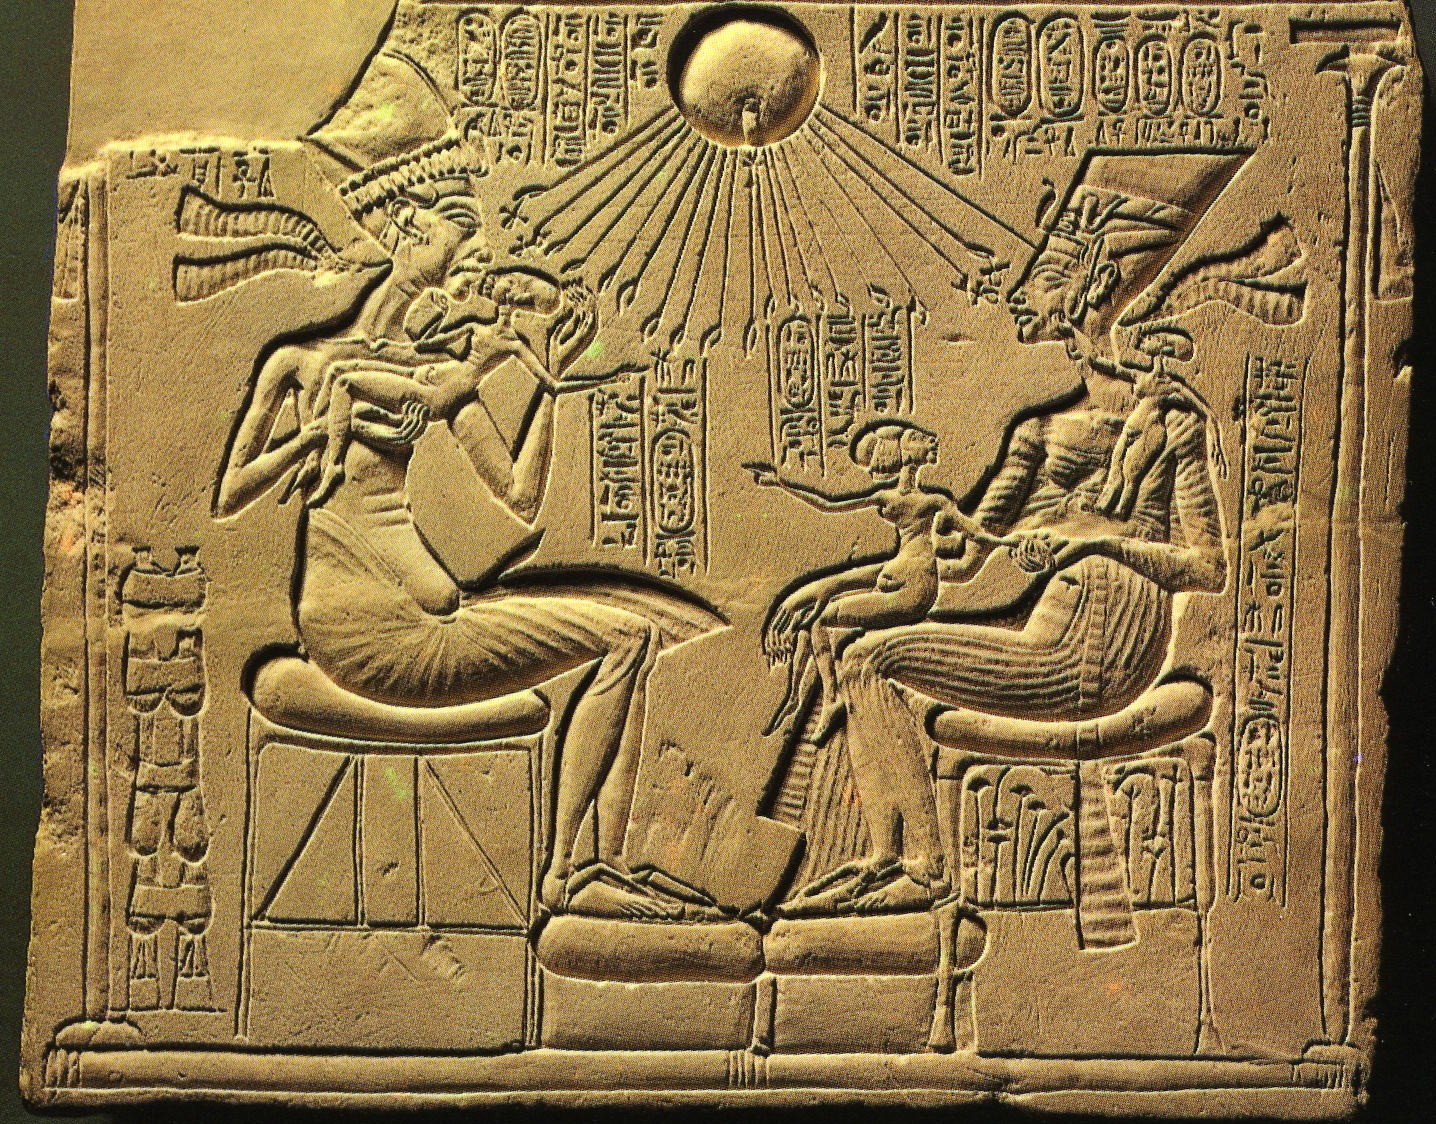 A depiction of Aten